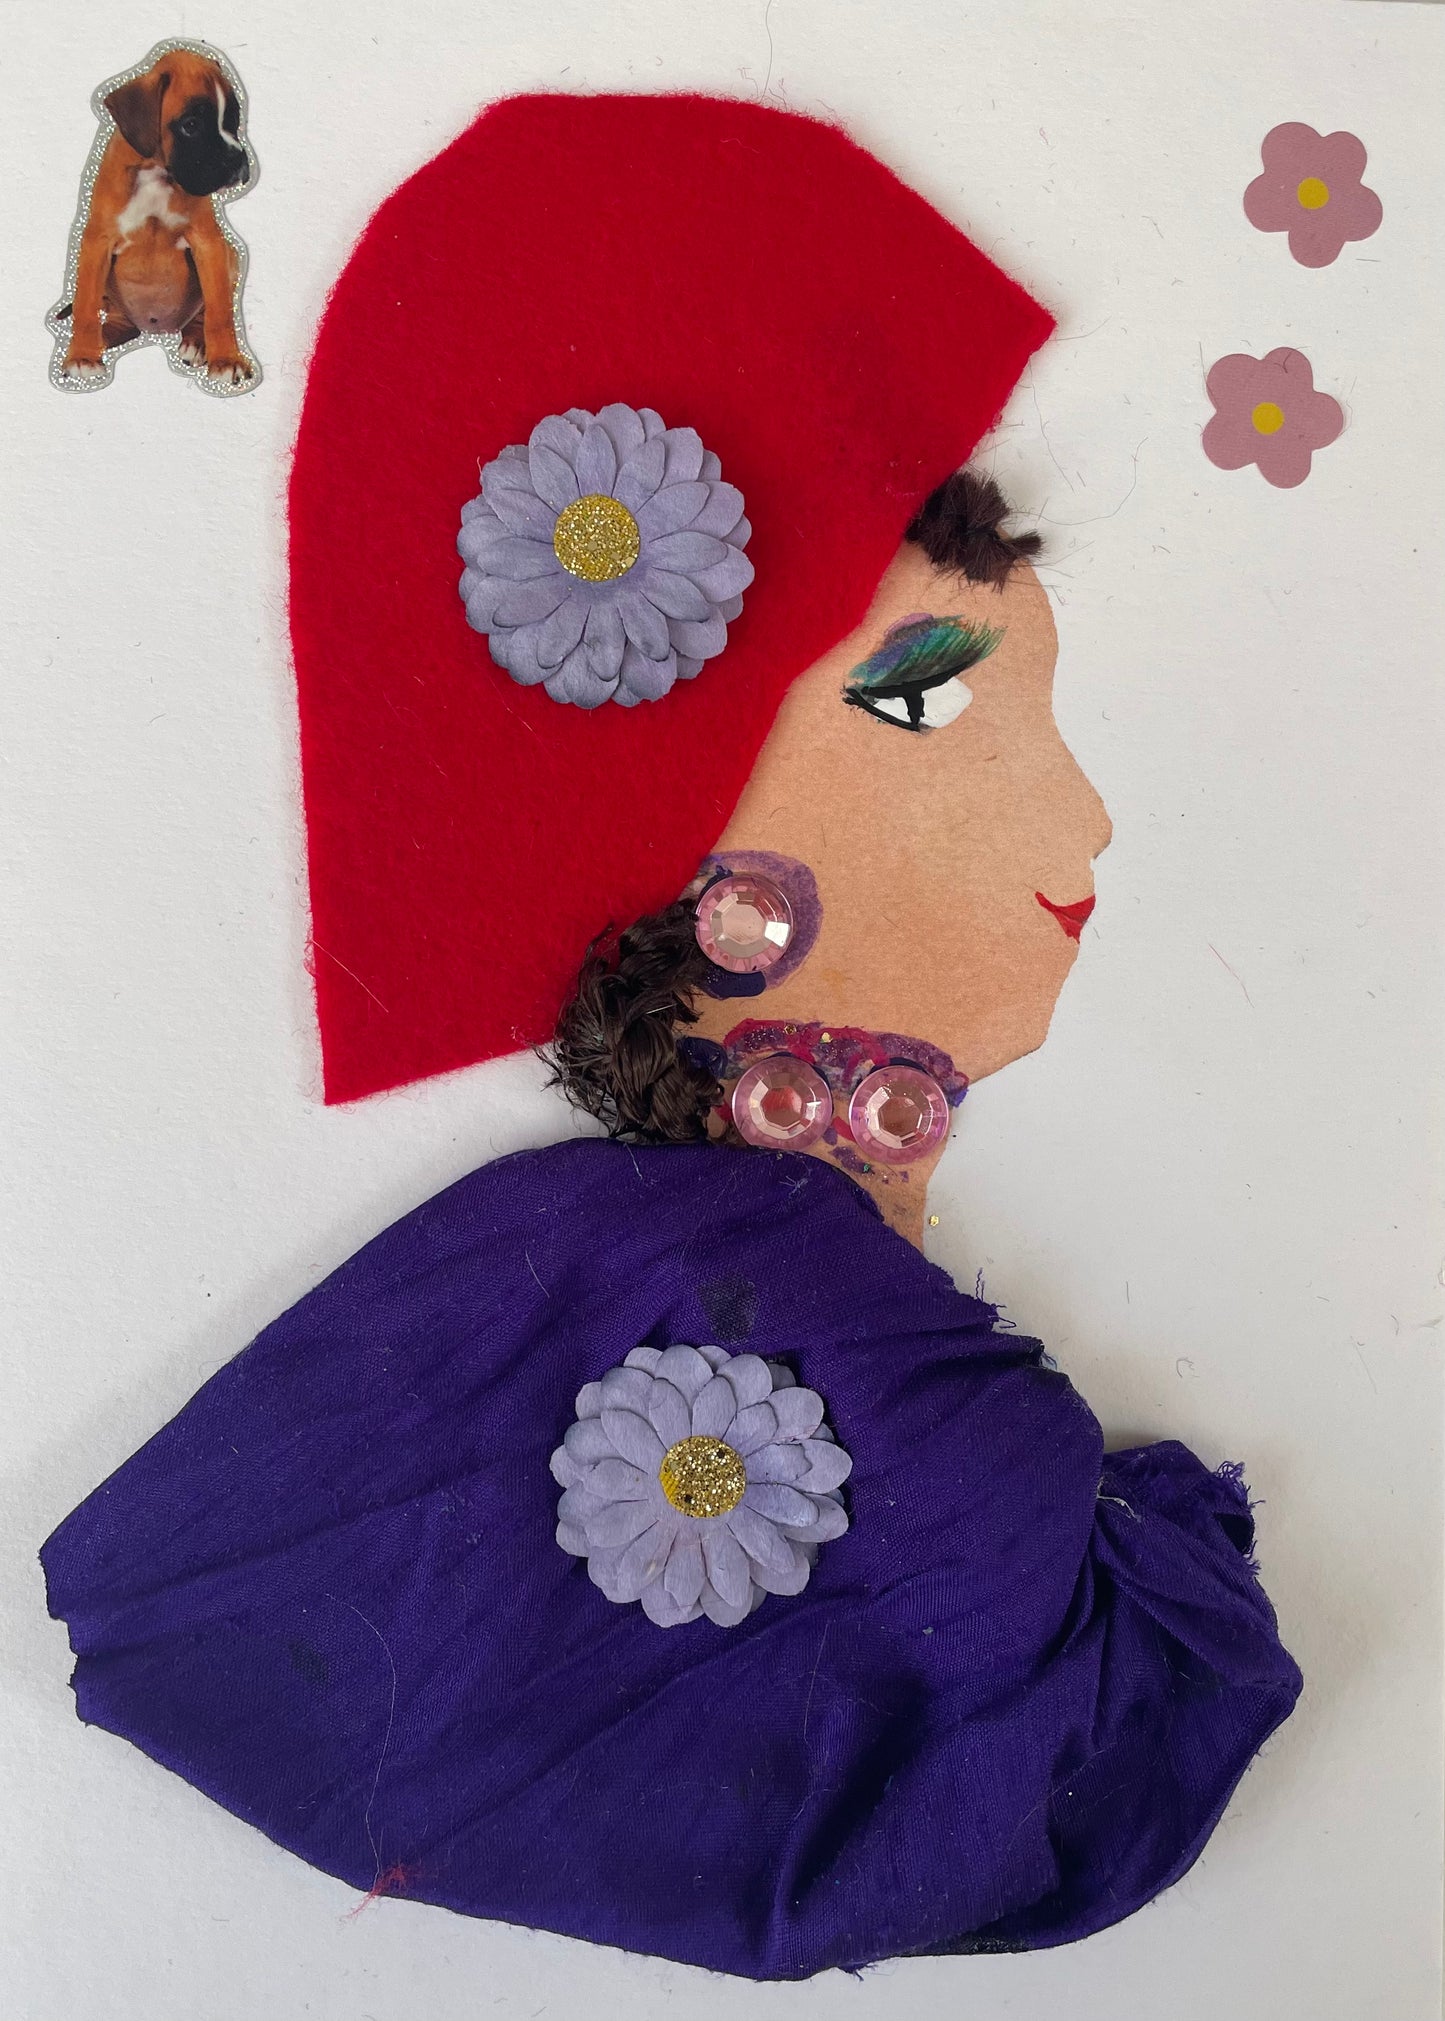 I designed this card of a woman who has a white skin tone and is wearing a red hat that has a purple flower in the center of it. She wears a dark purple blouse that has a light purple flower in the center of it. She wears pink gem jewellery. In one corner there is a dog and in the other there are two pink flowers.